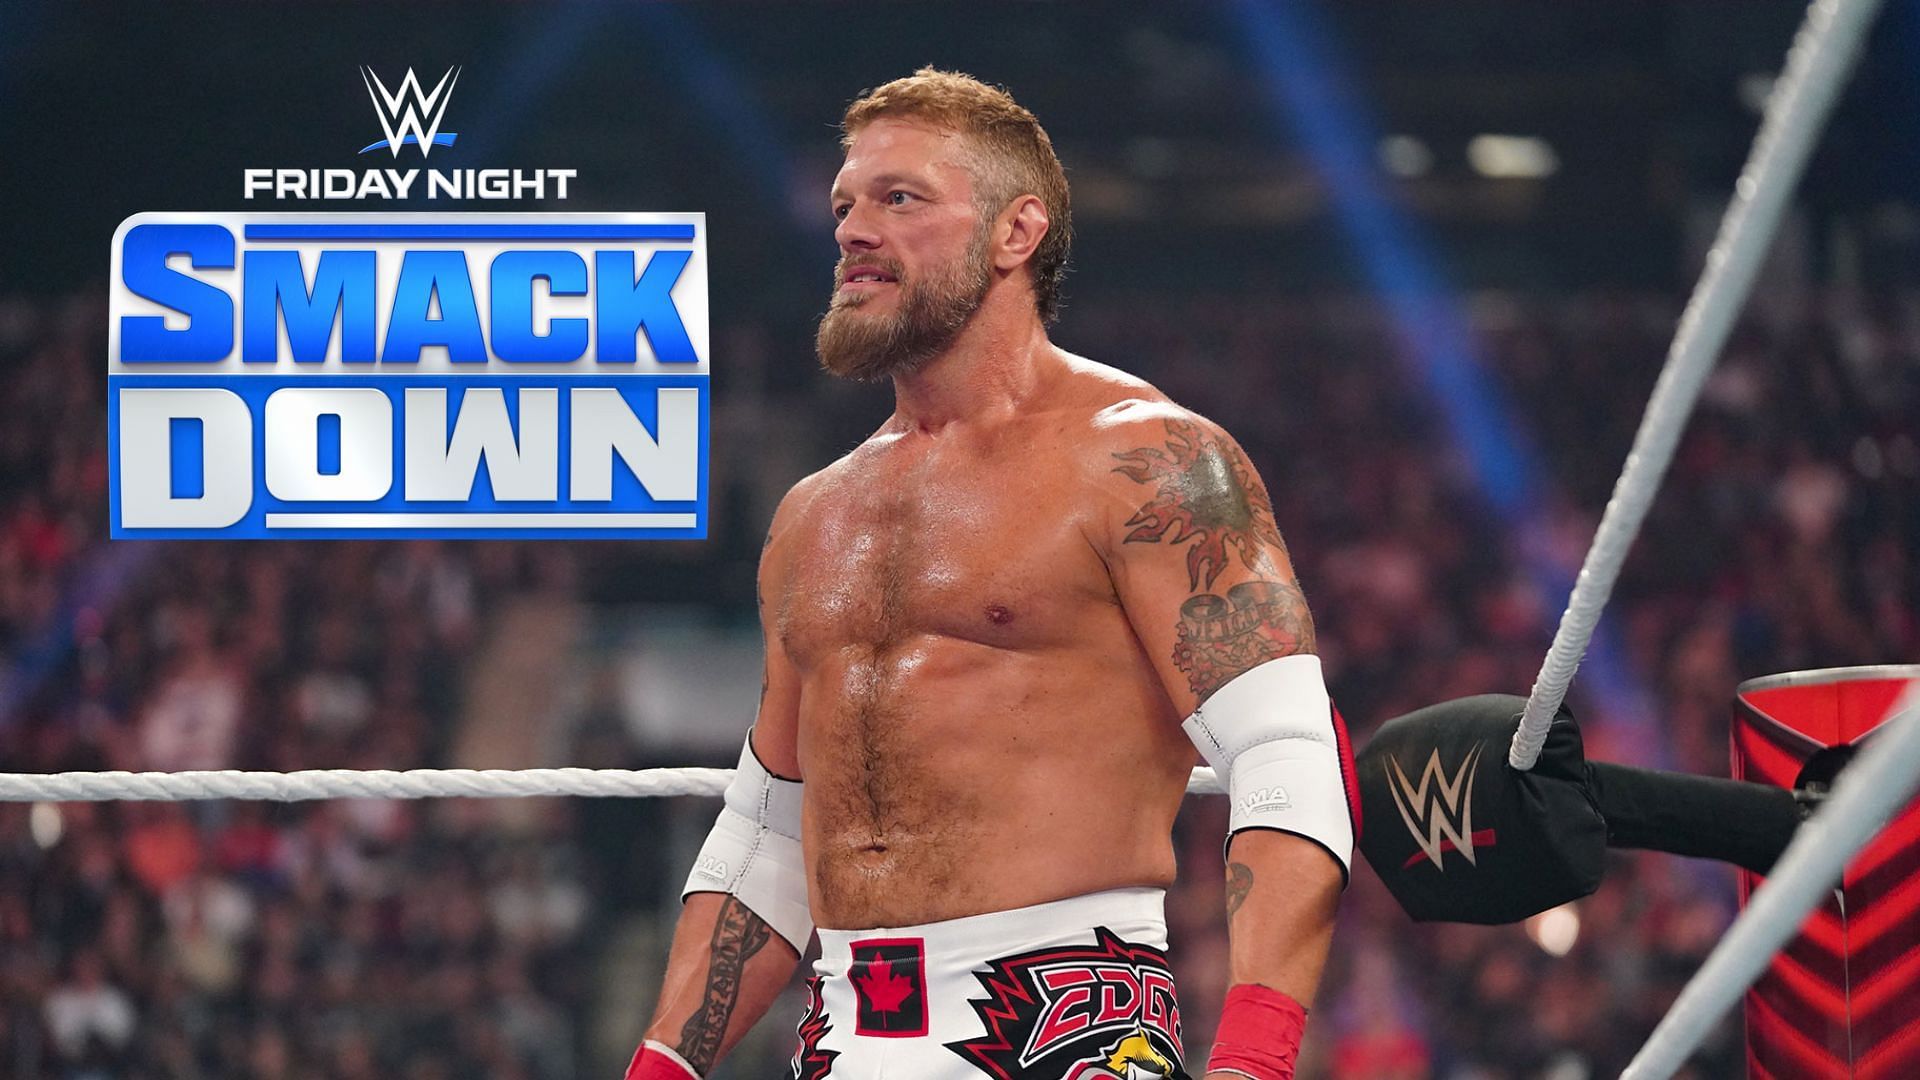 Edge could wrestle twice this Friday on SmackDown.